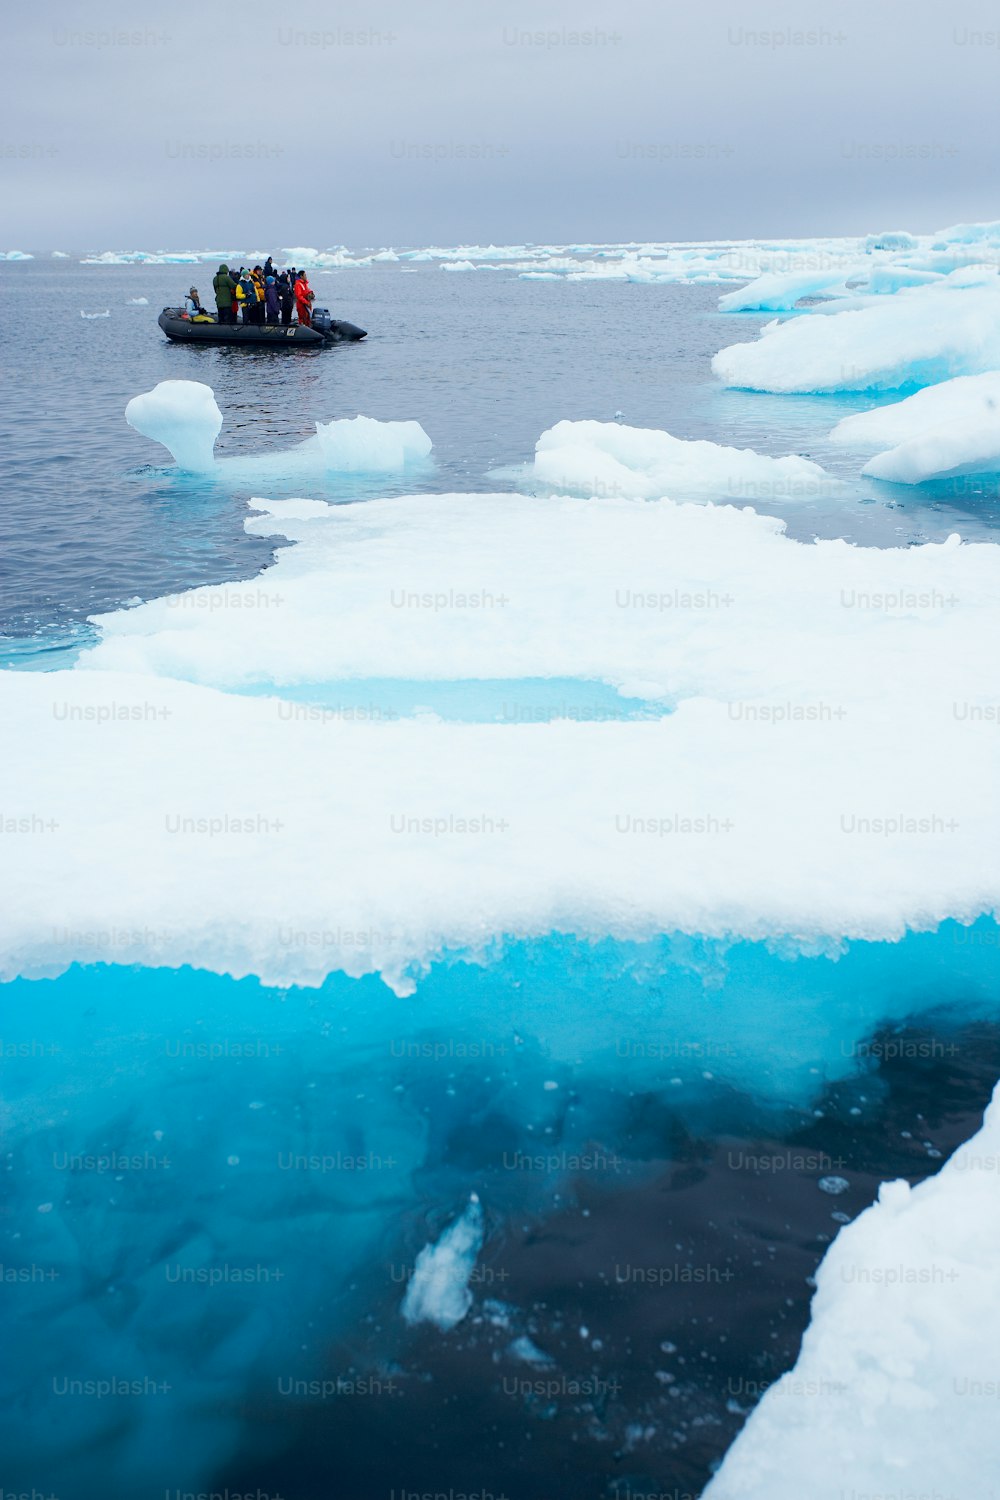 a group of people in a small boat on ice floes